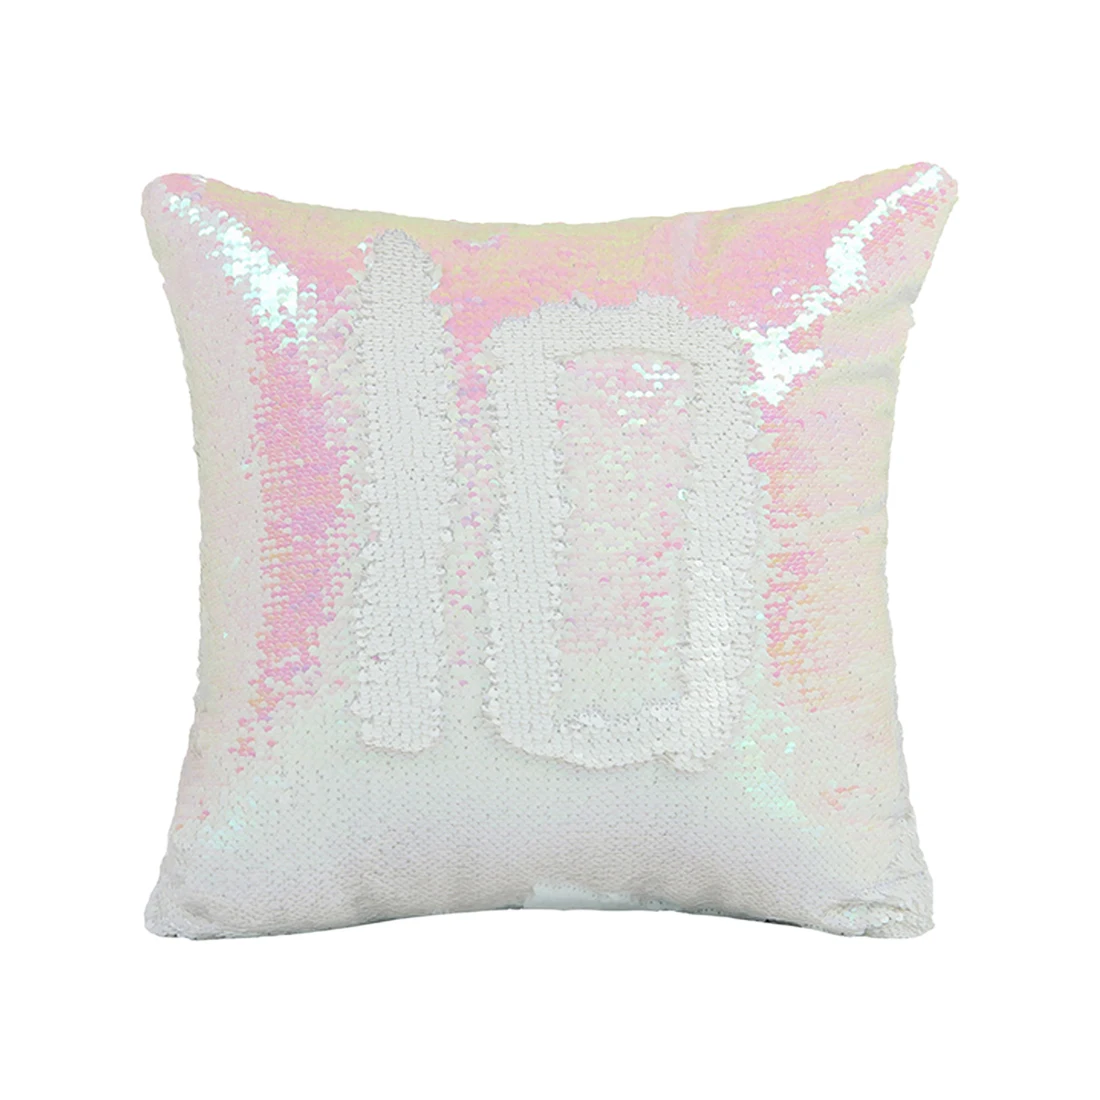 

Bedding Outlet DIY Mermaid Sequin Cushion Cover Magical Pink Throw Pillowcase 40cmX40cm Color Changing Reversible Pillow Case